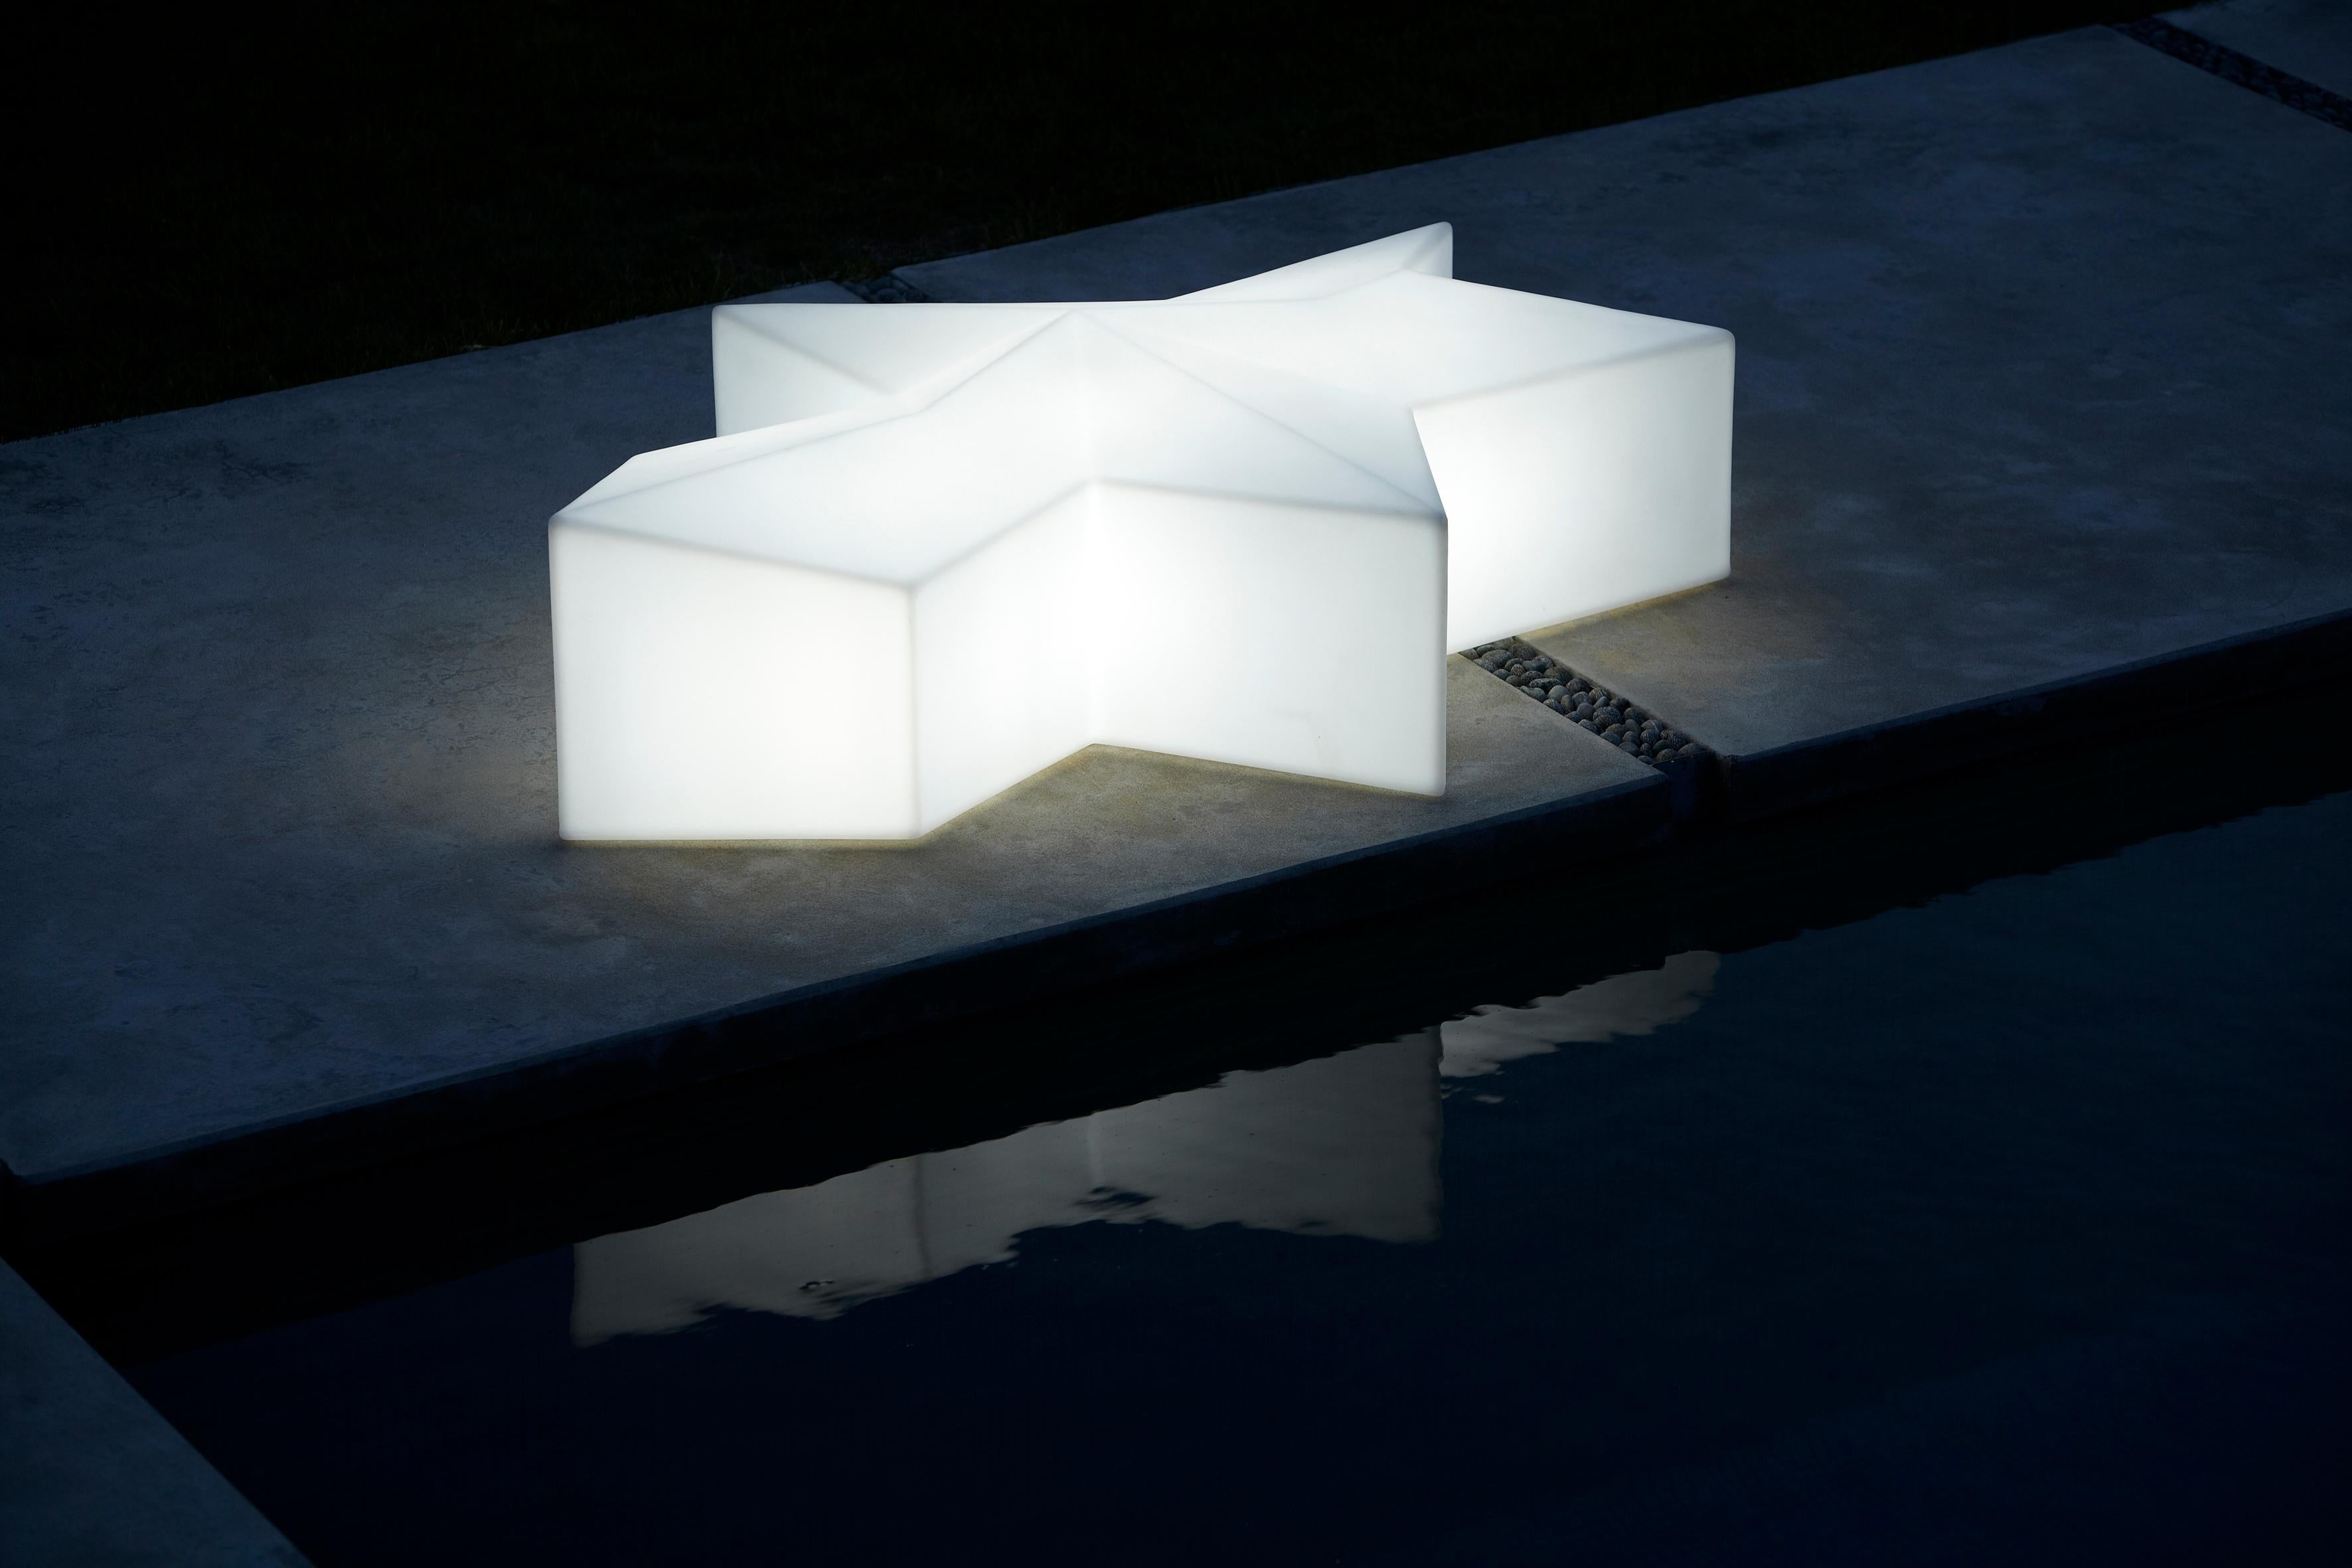 Lighted Out Glacé Bench by Alessandro Mendini
Dimensions: D 125 x W 180 x H 50 cm. Seat Height: 50 cm.
Materials: Polyethylene.
Weight: 27 kg.

This product is suitable for indoor and outdoor use. Lighting system compatible with LED light bulbs.